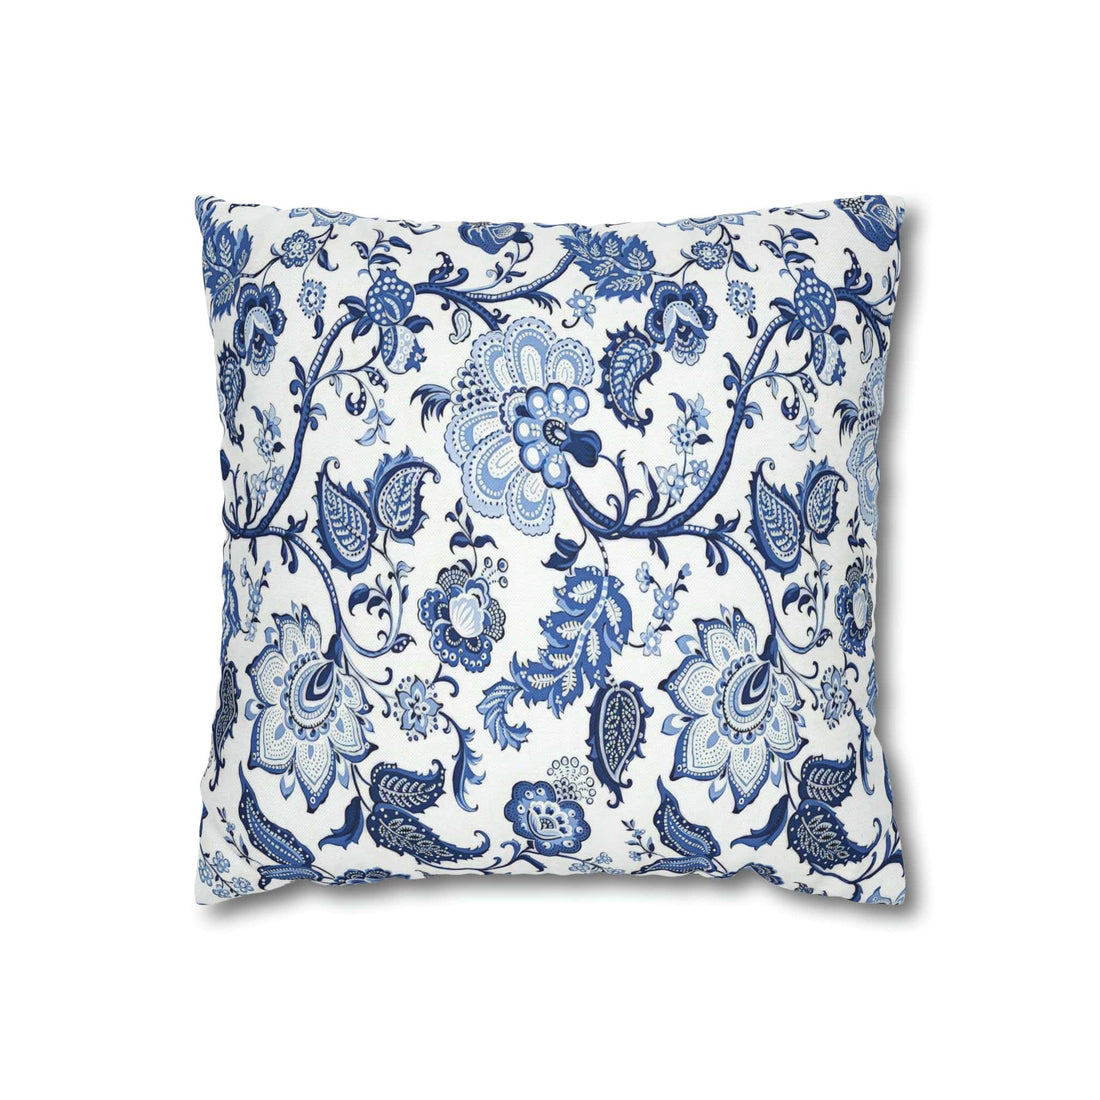 Kate McEnroe New York Blue and White Floral Chinoiserie Jacobean Pillow CoverThrow Pillow Covers22084992826900073938